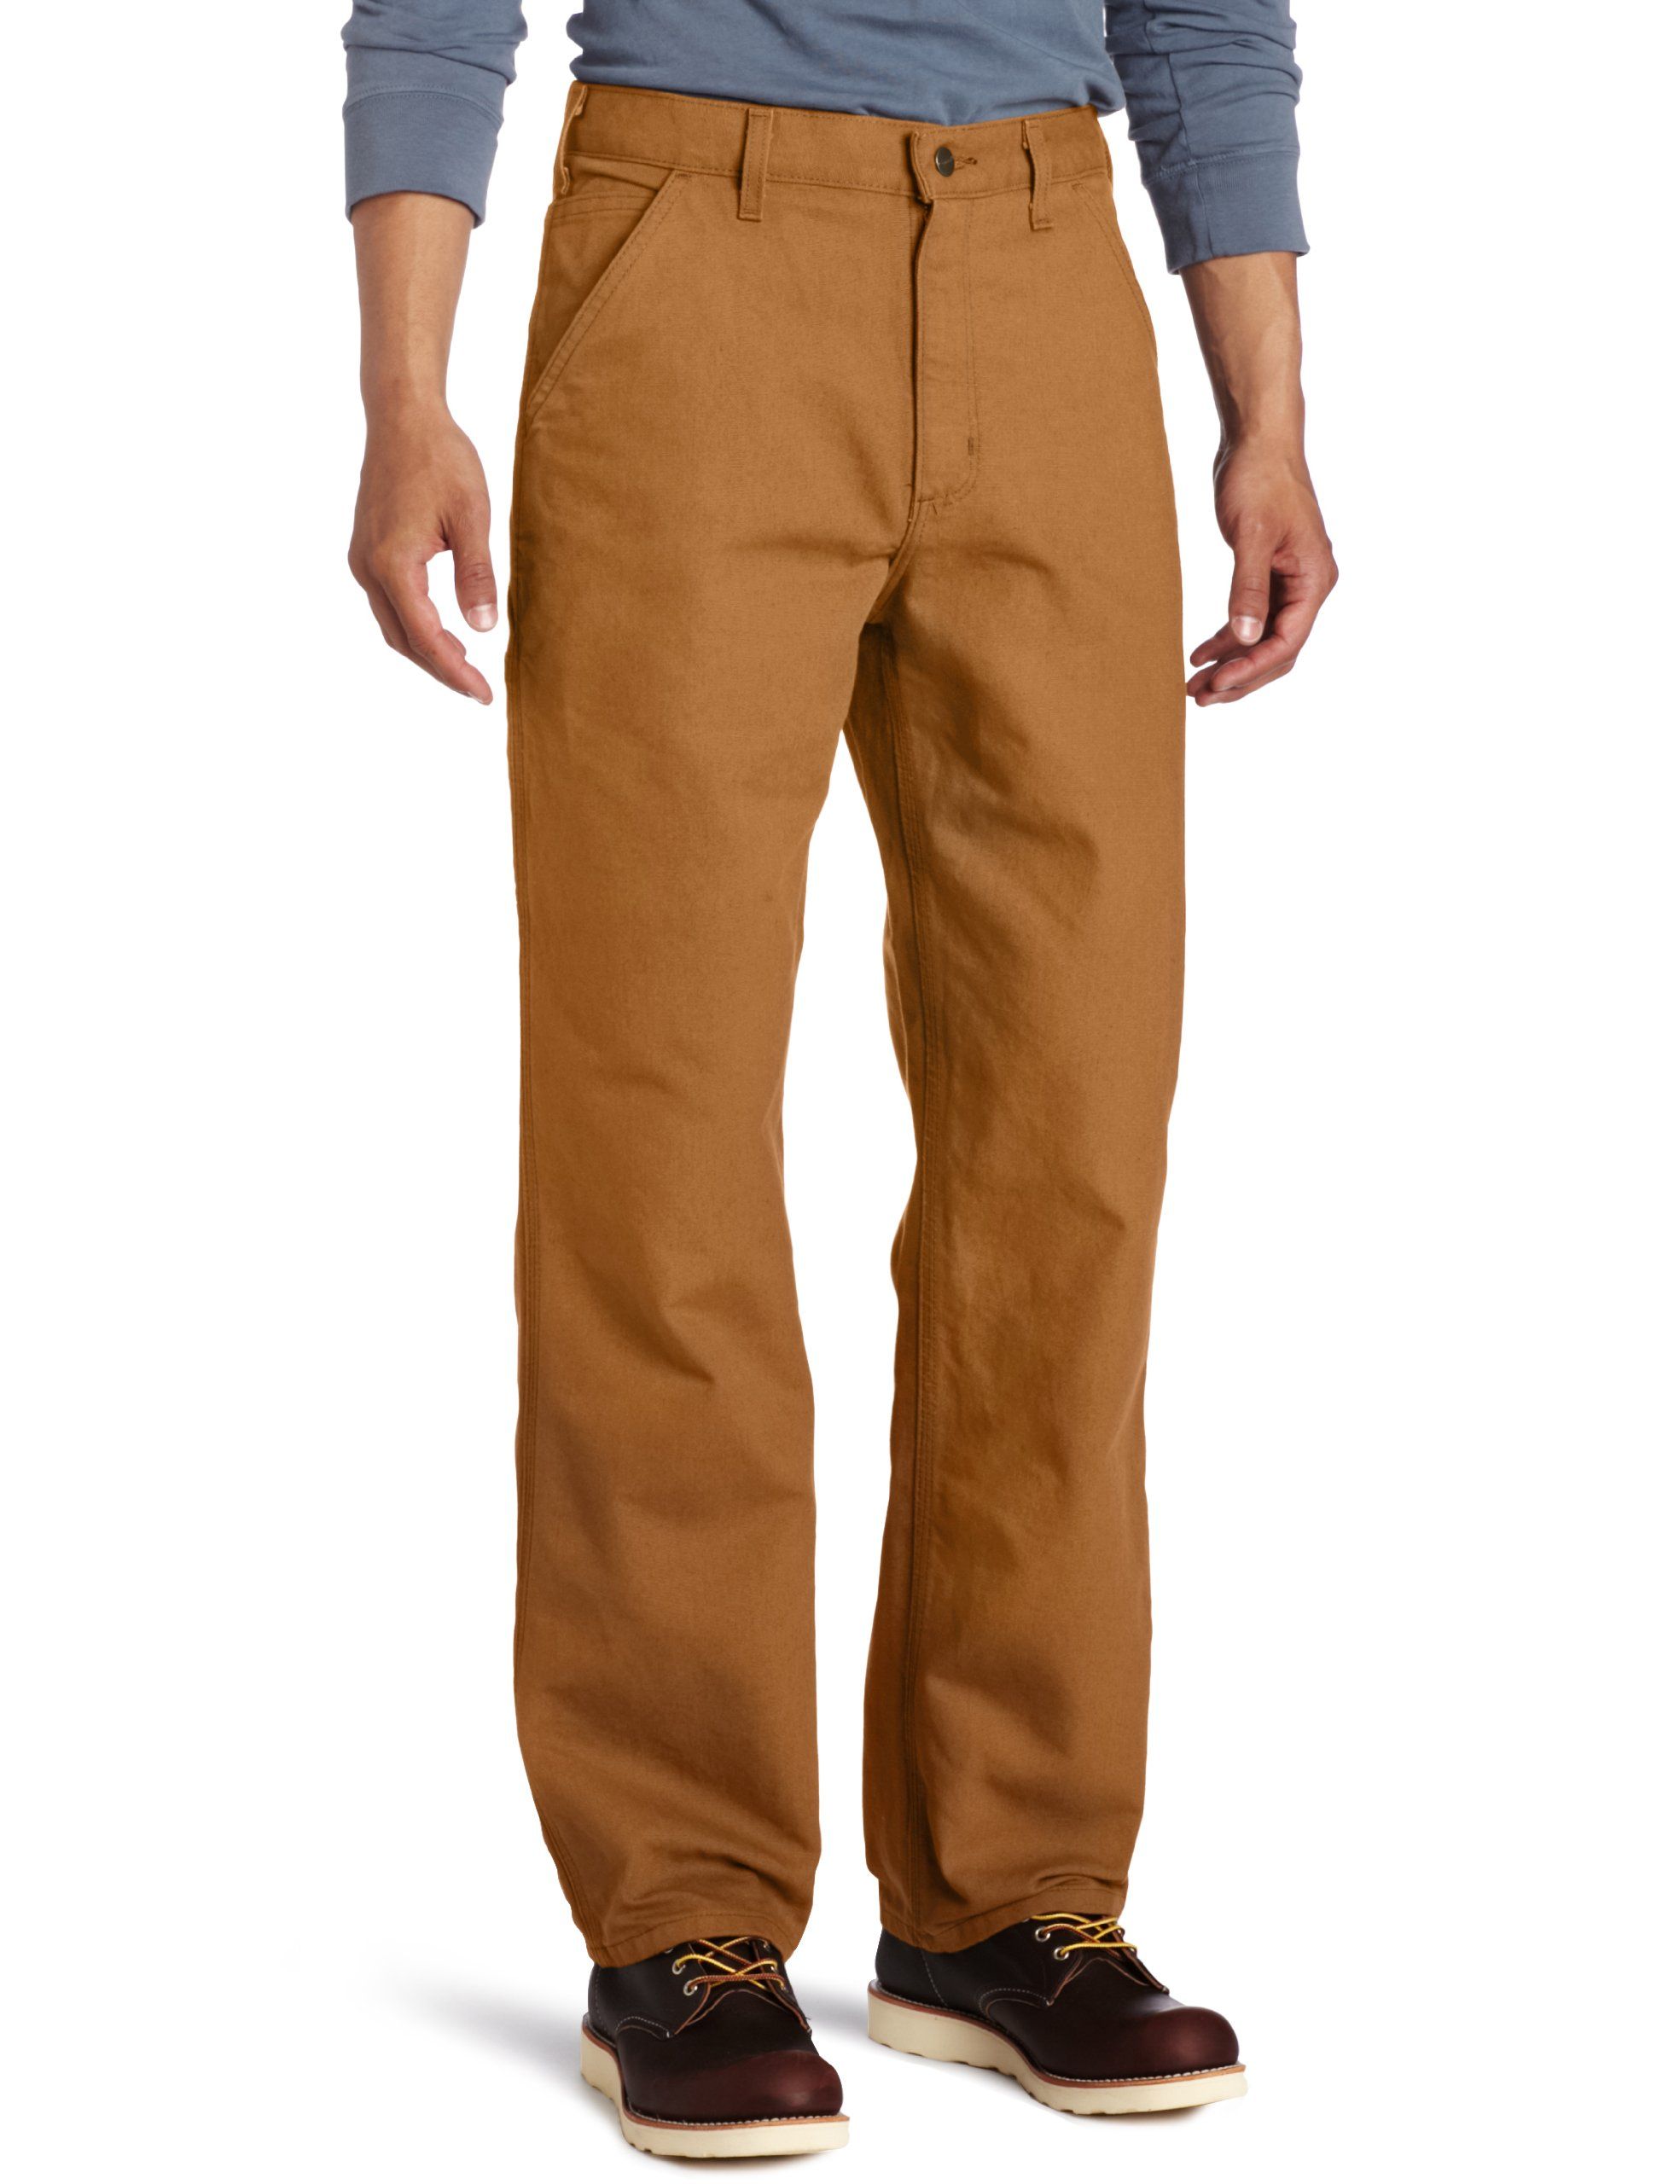 The best work pants for your occupation